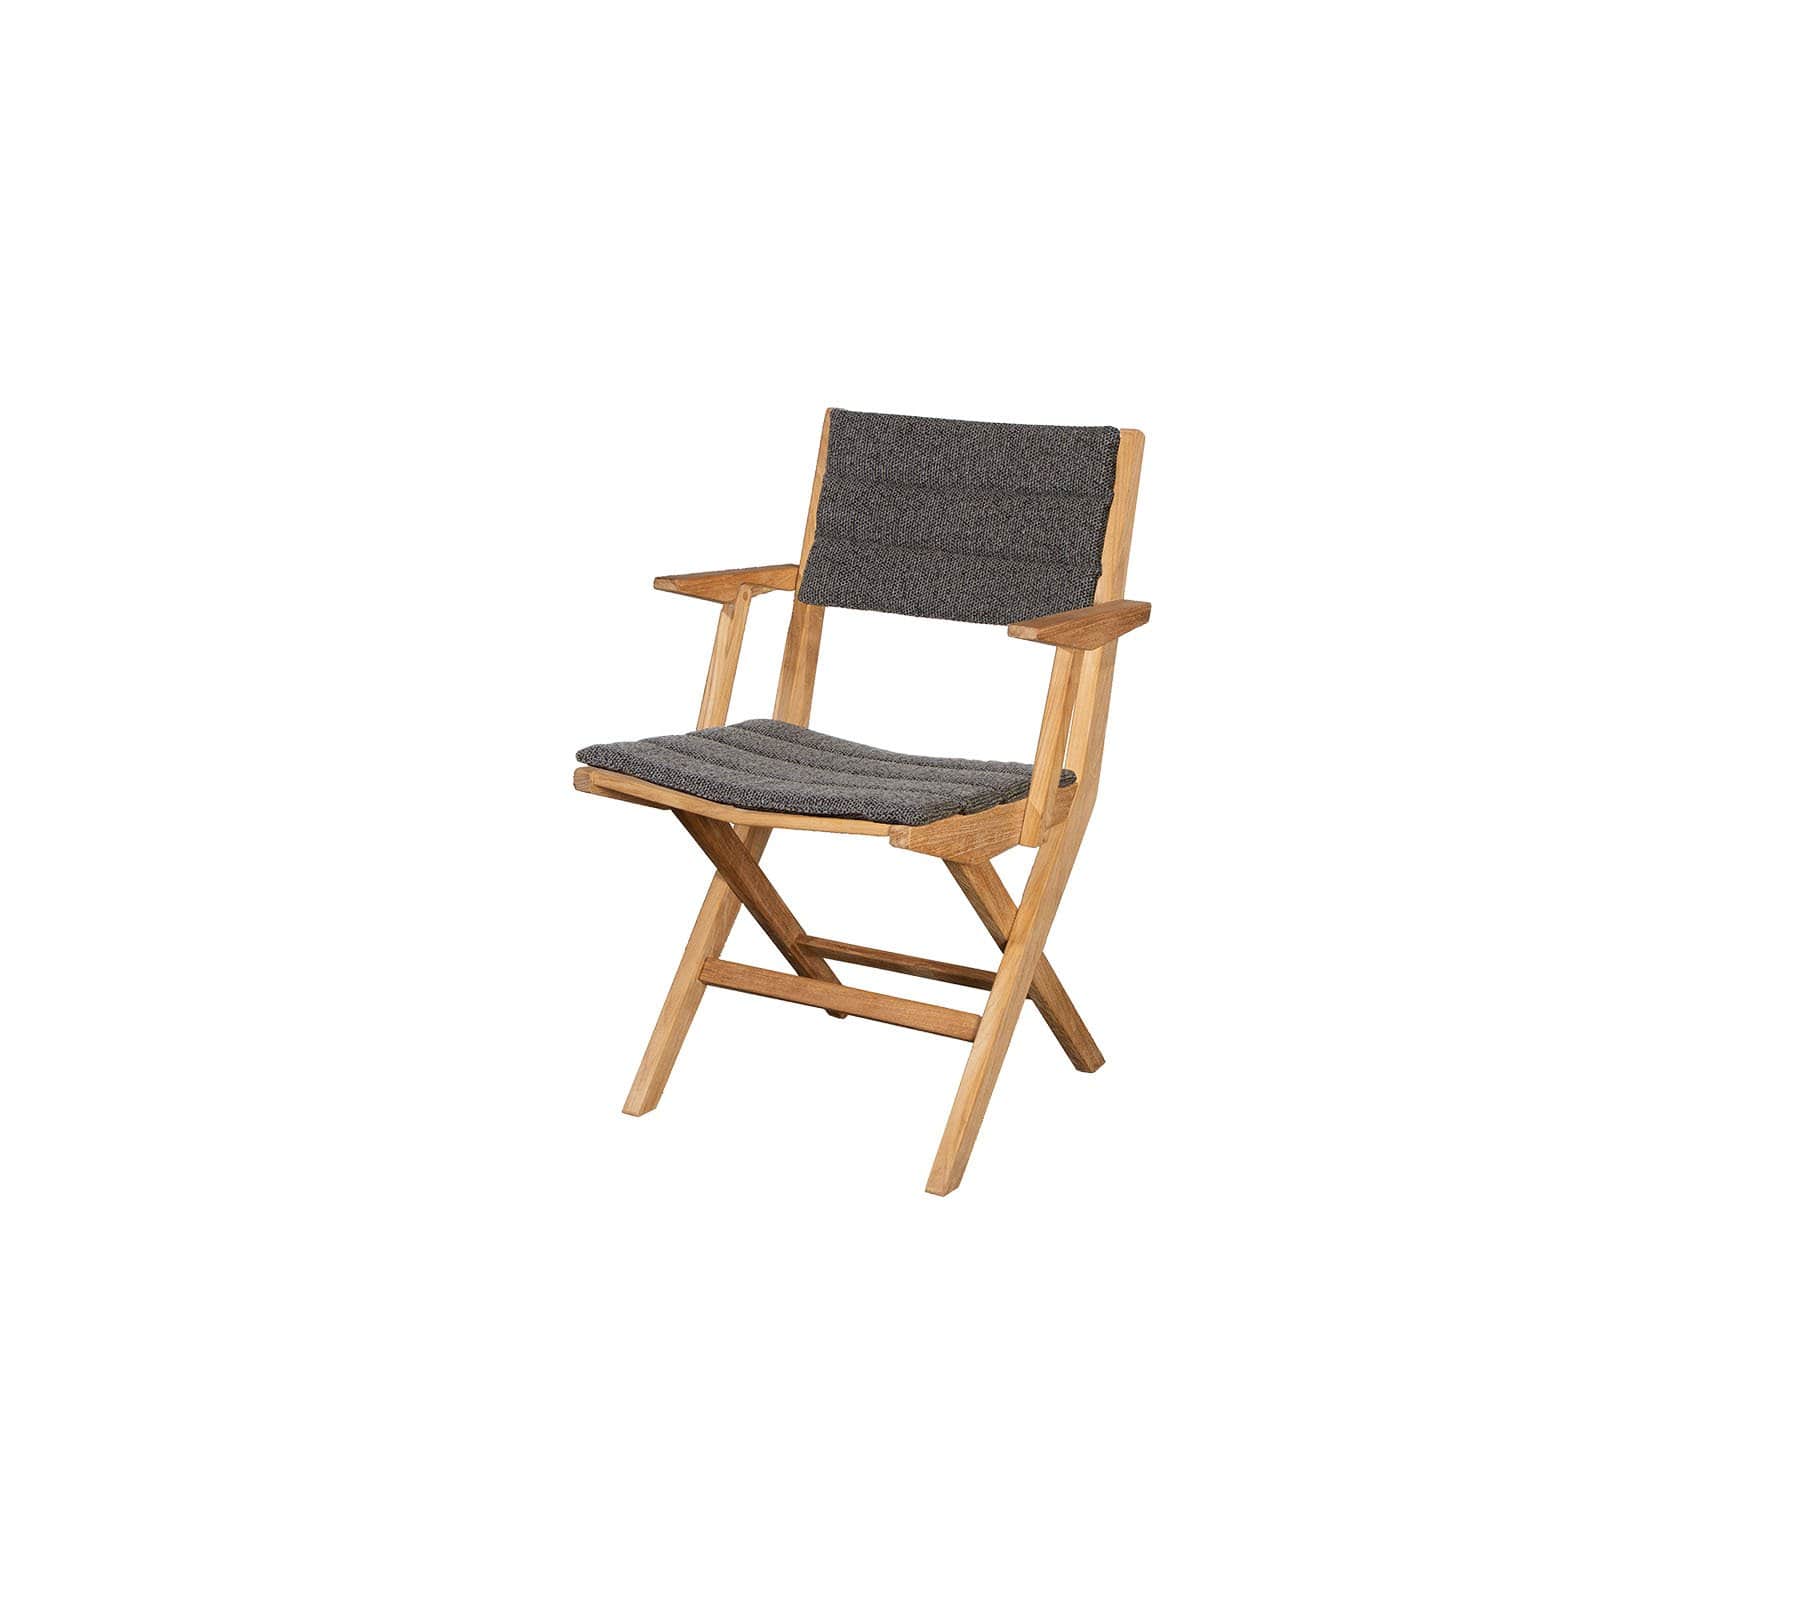 Boxhill's Flip Folding Outdoor Teak Dining Armchair with Grey Cushion in white background